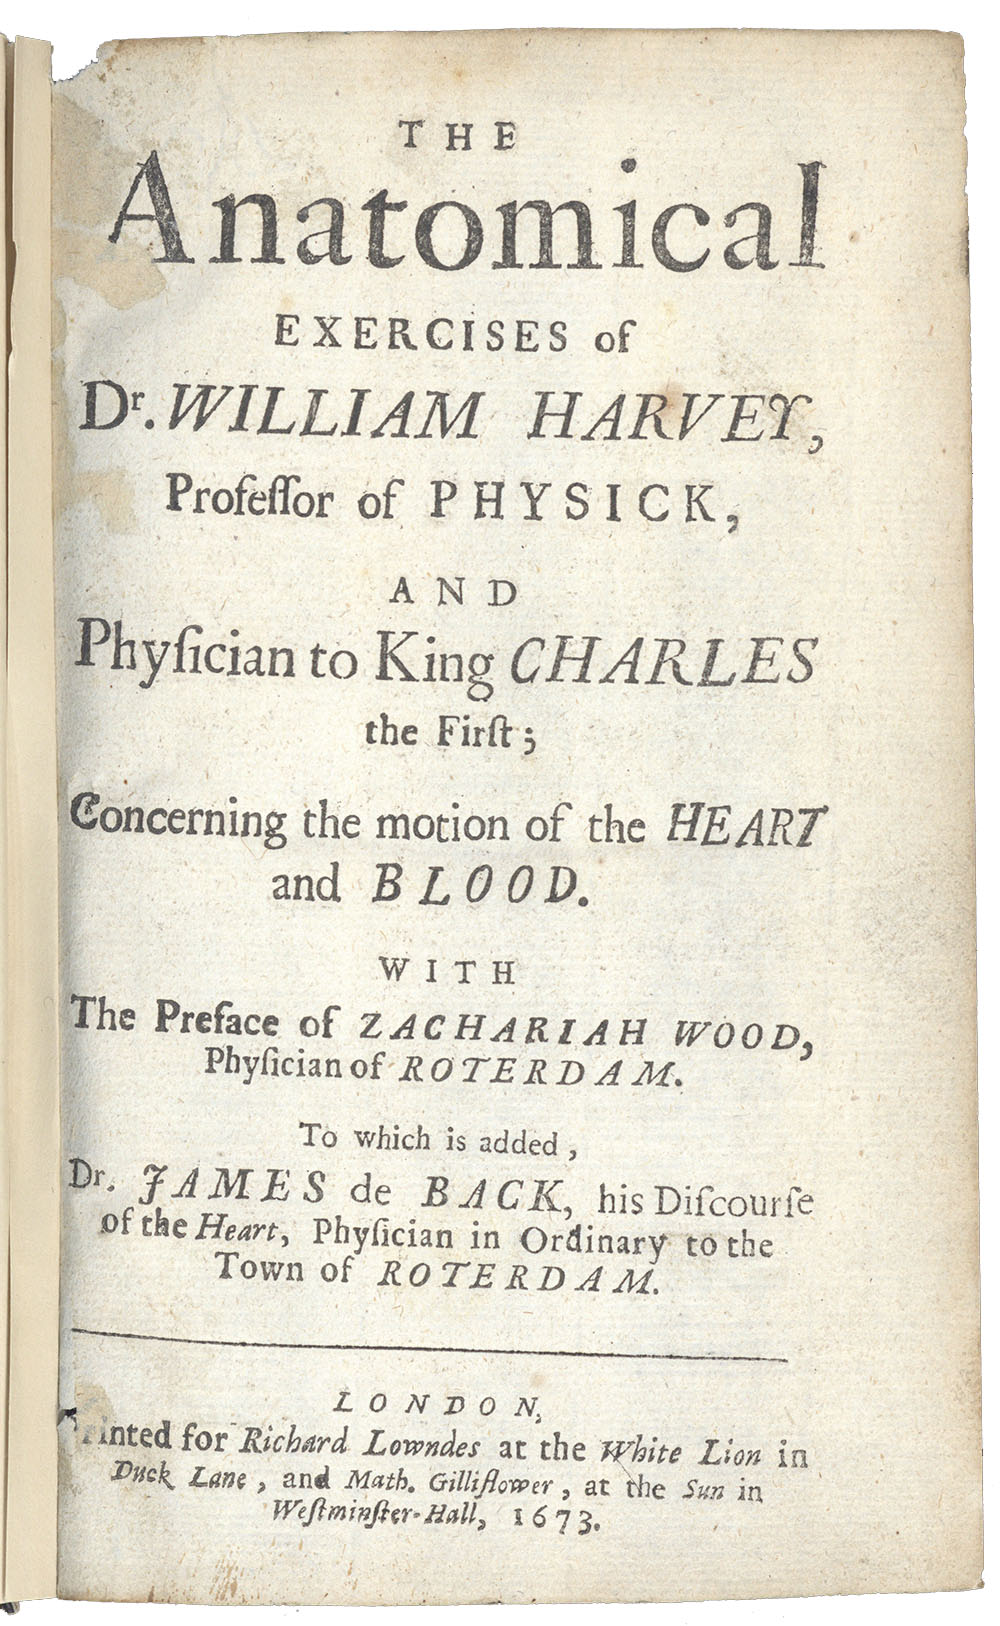 <p>Title page of William Harvey’s ‘The Anatomical Exercises of Dr William Harvey concerning the motion of the Heart and Blood’. Along with his book entitled On the Motion of the Heart’ he challenged the work of Galen. Through close observation and working on cold blooded amphibians he could see that blood was pumped around the body by the heart in one direction controlled by valves. He proved Galen’s argument that the liver made blood to be incorrect and proved instead that the heart was at the centre of the body.</p>
